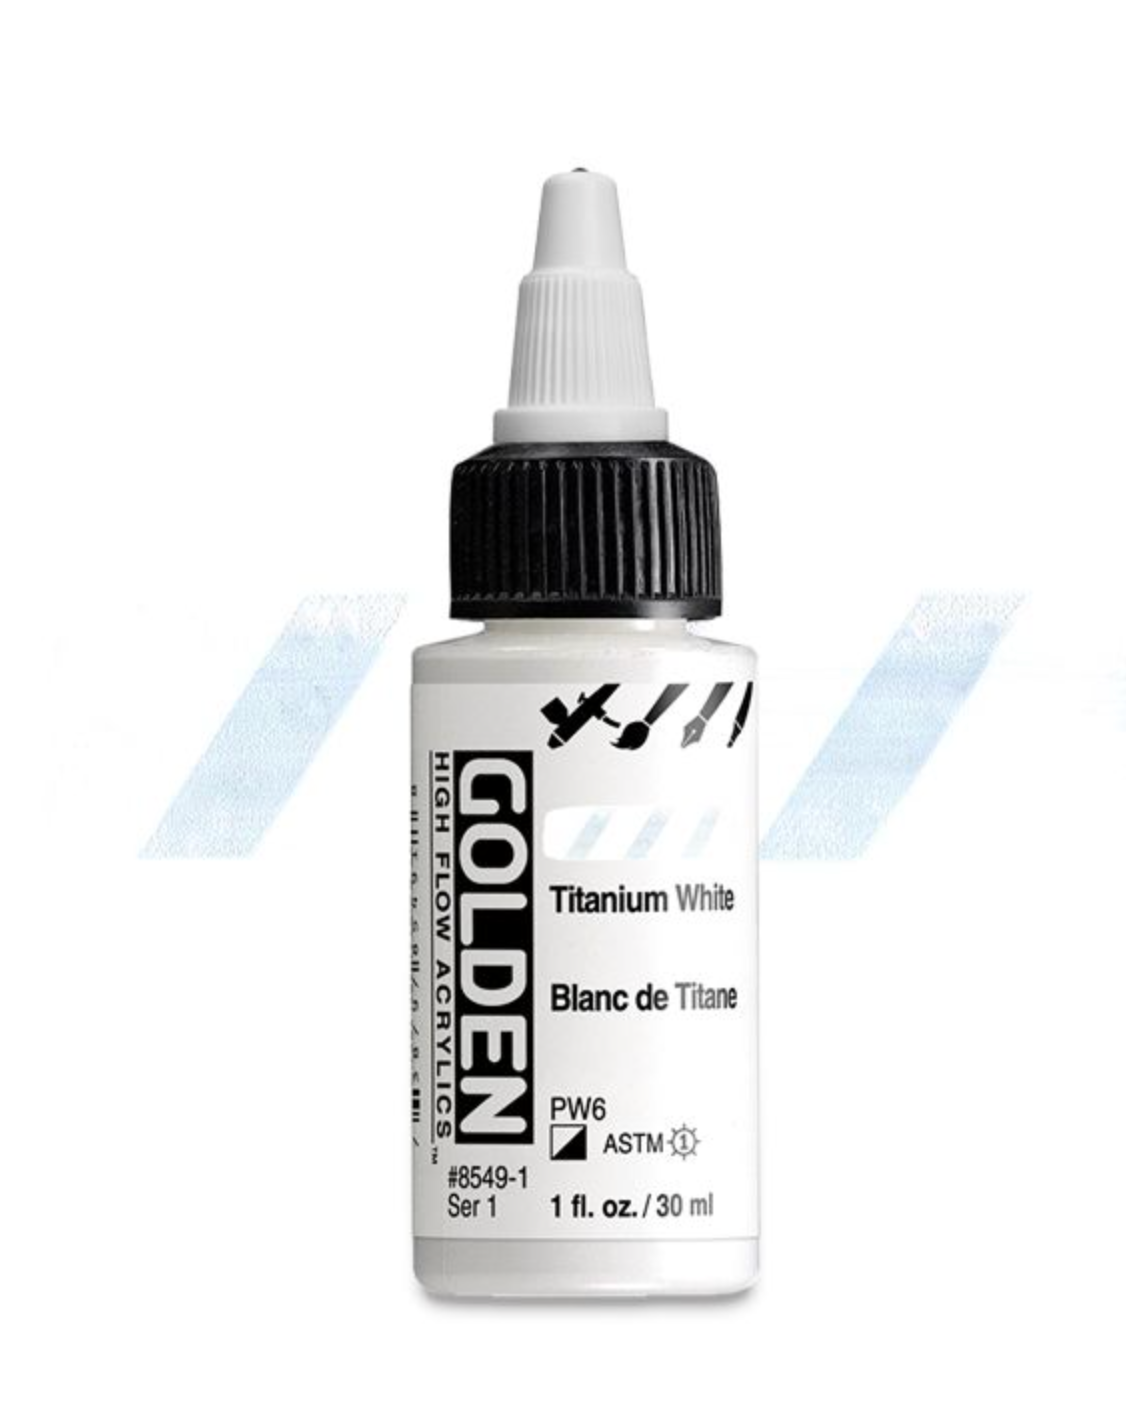 High Flow Acrylics for Airbrush, Striping, Textiles, Marbleizing